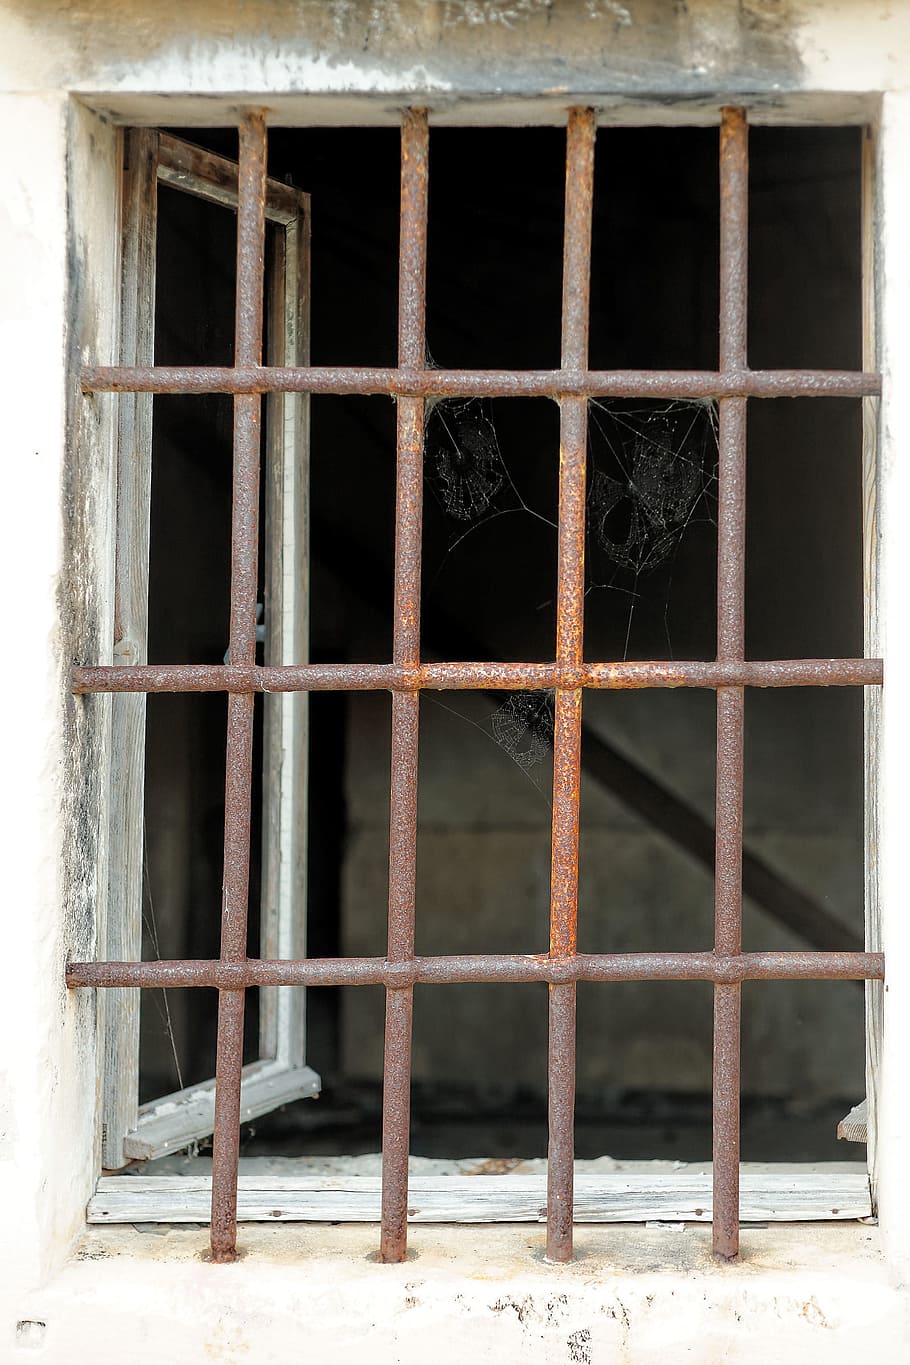 old, window, rusty, bars, architecture, detail, rust, opening, building, built structure